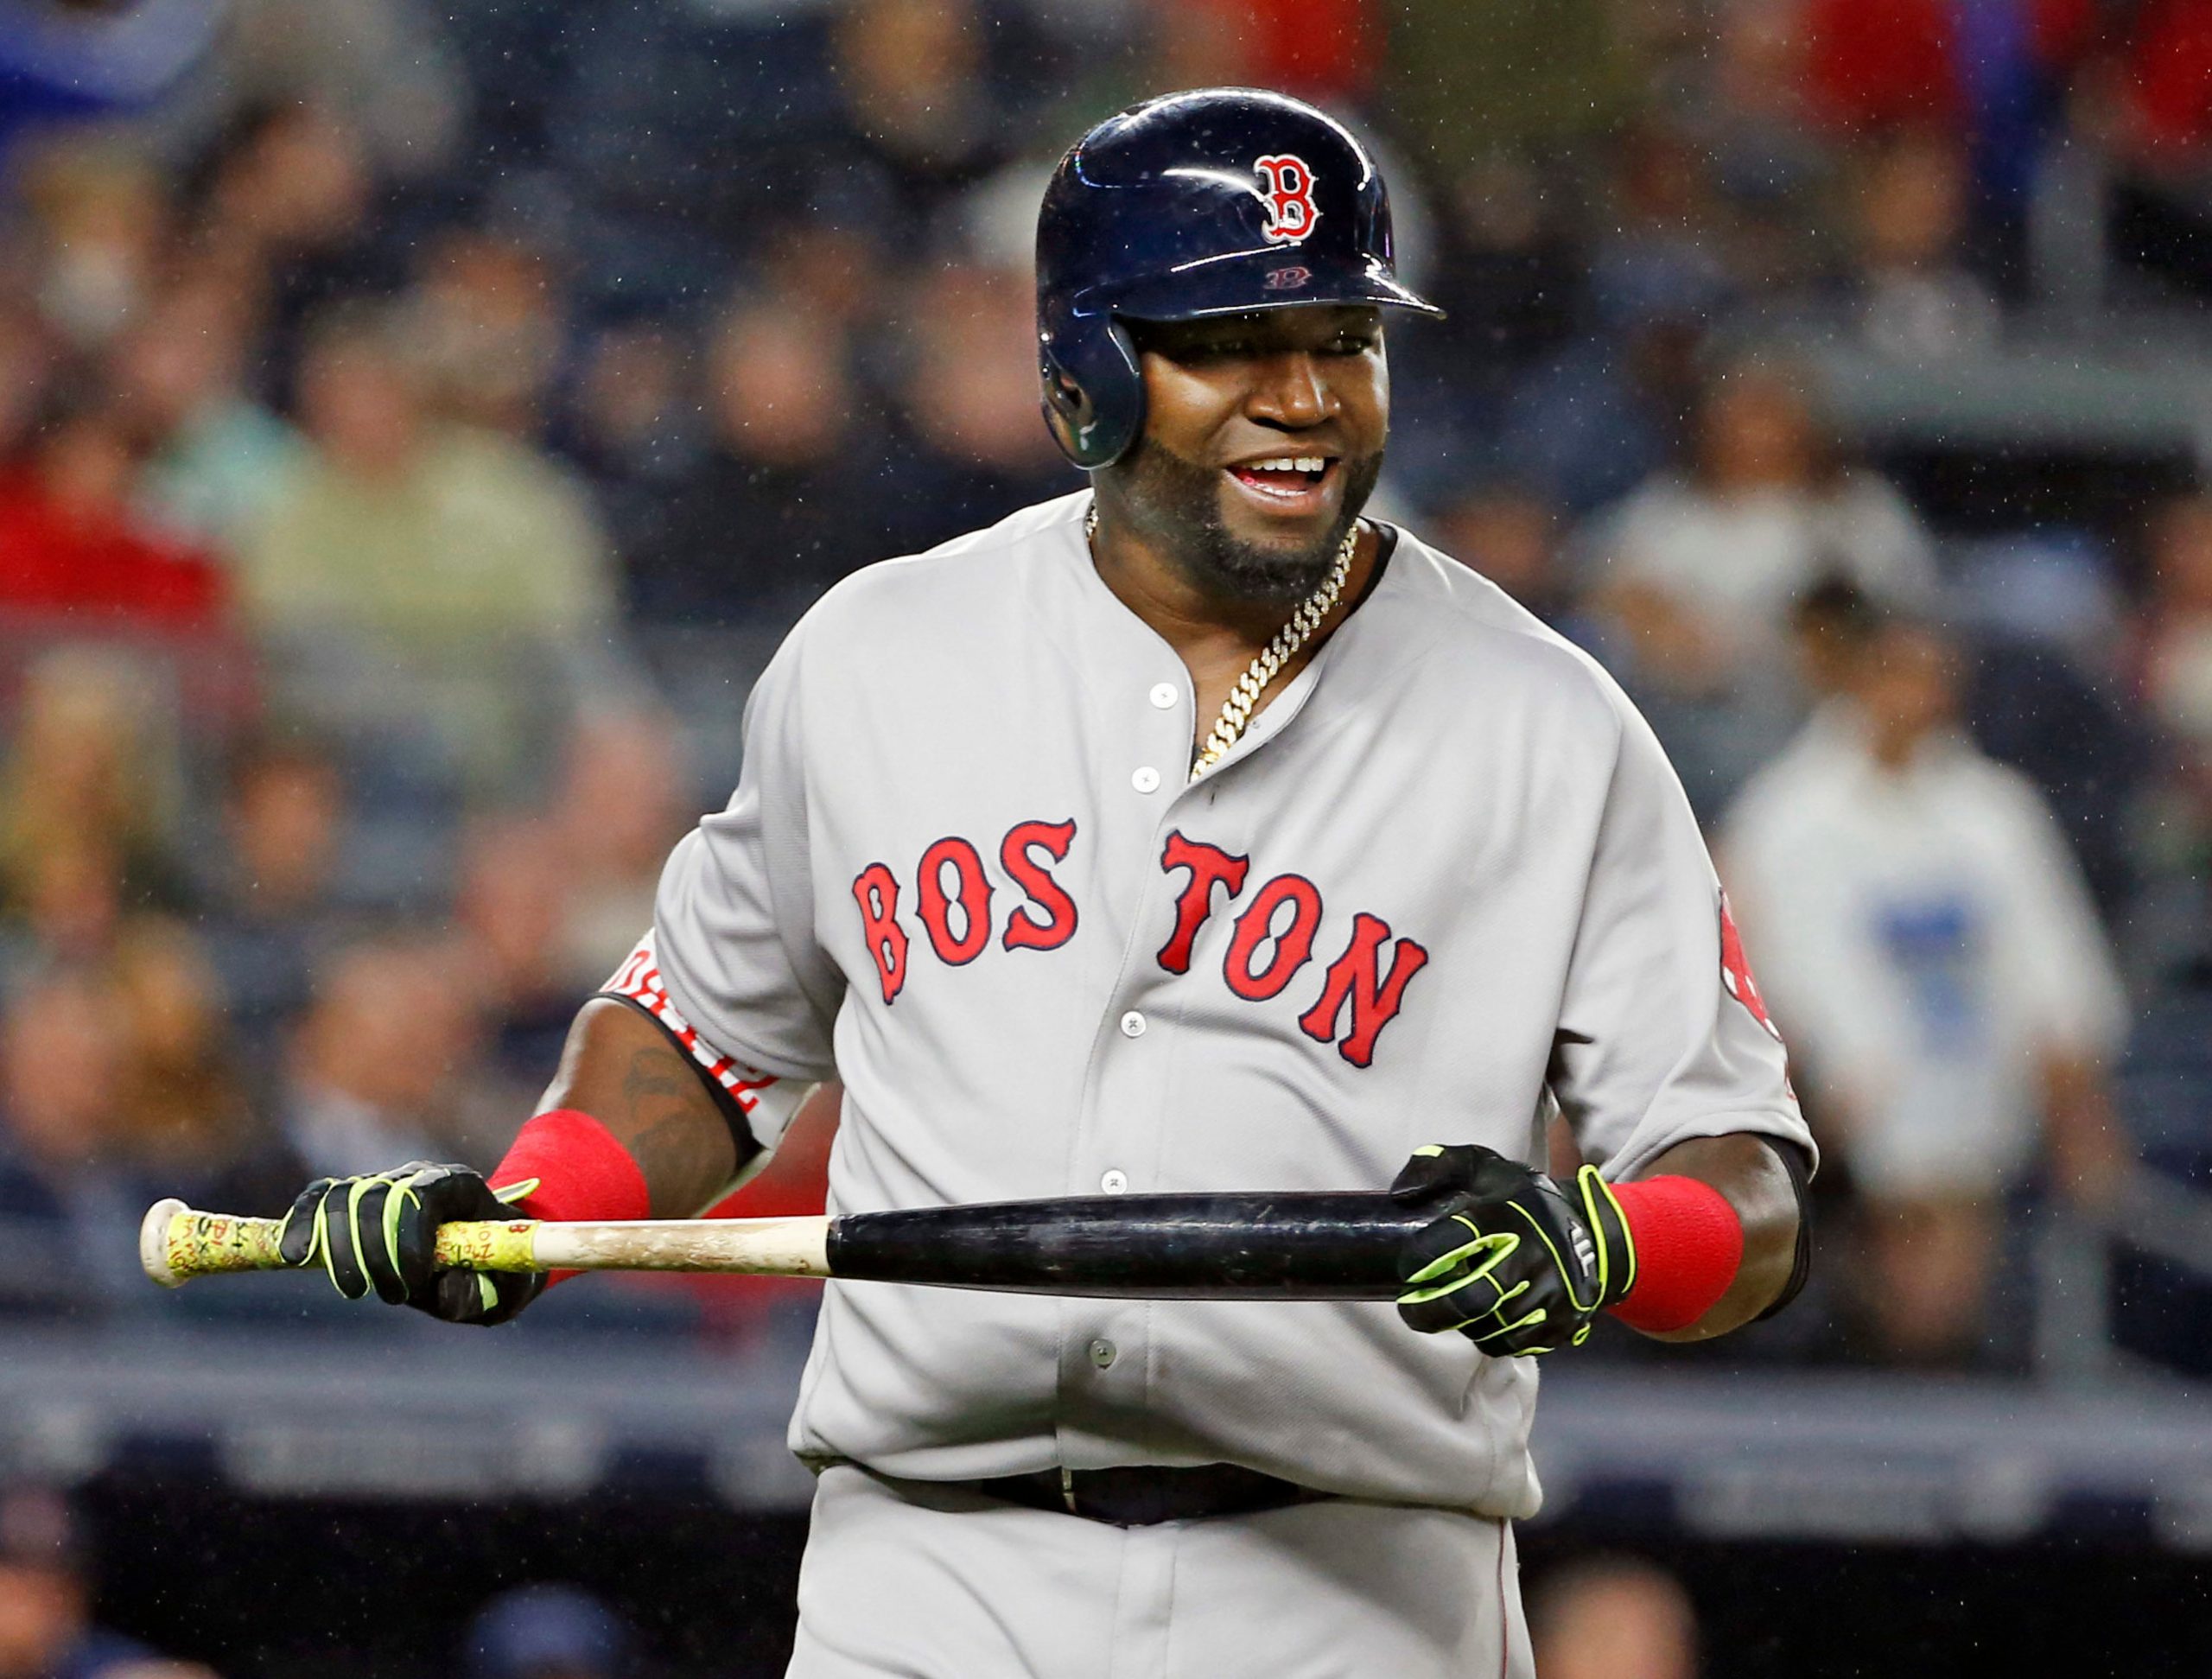 David Ortiz, Roger Clemens and Barry Bonds to be close calls for Baseball Hall of Fame